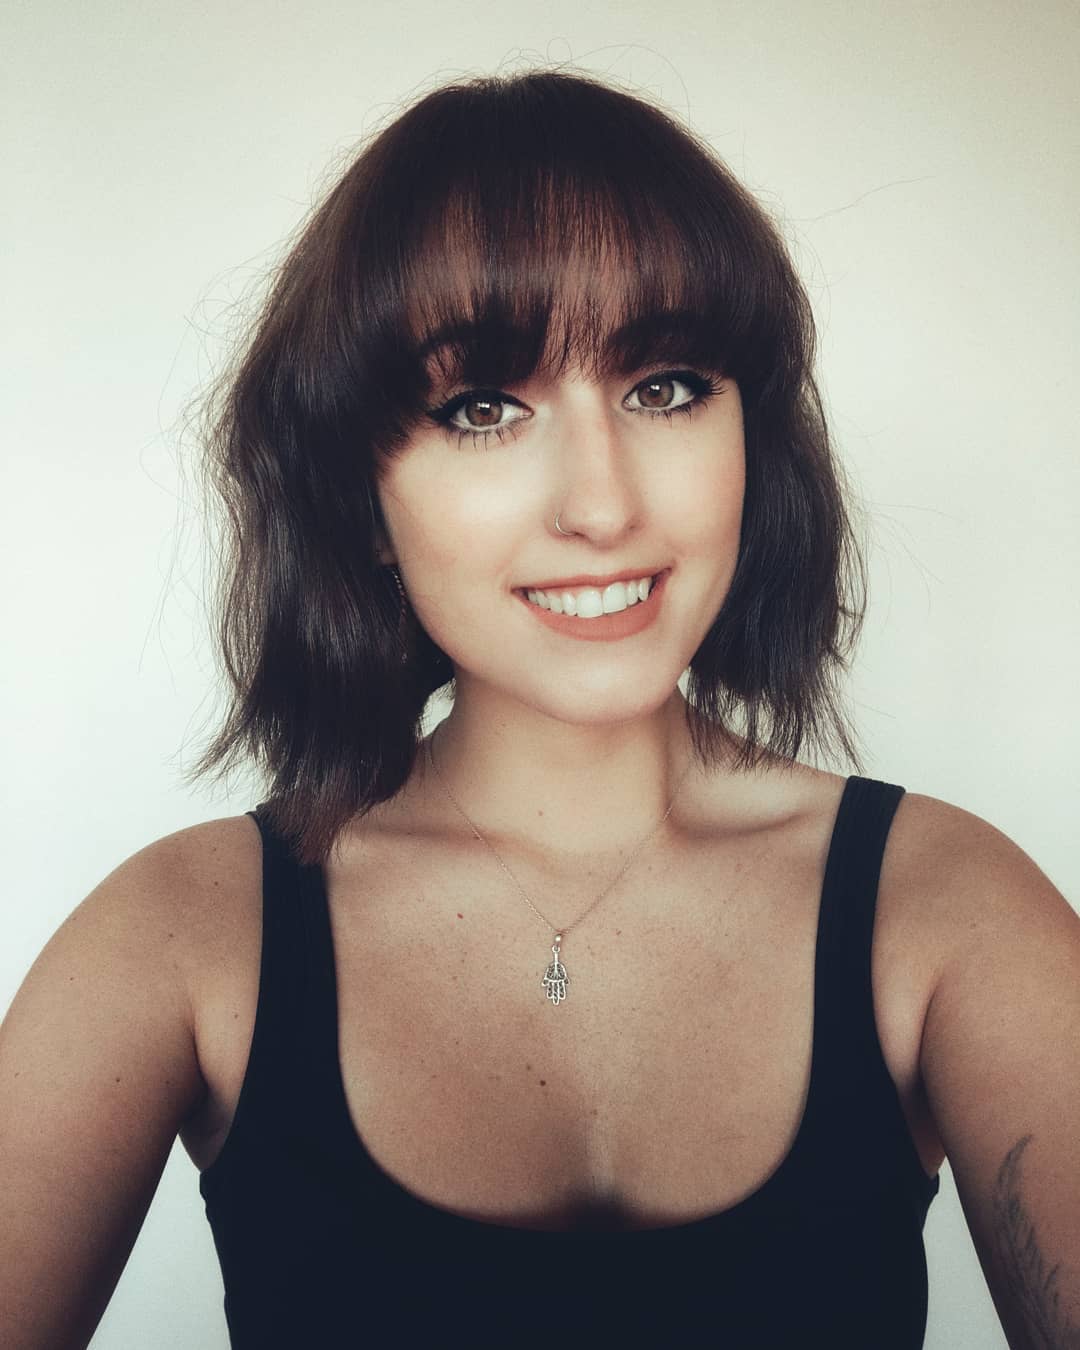 Image of woman with short hair with bangs hairstyle